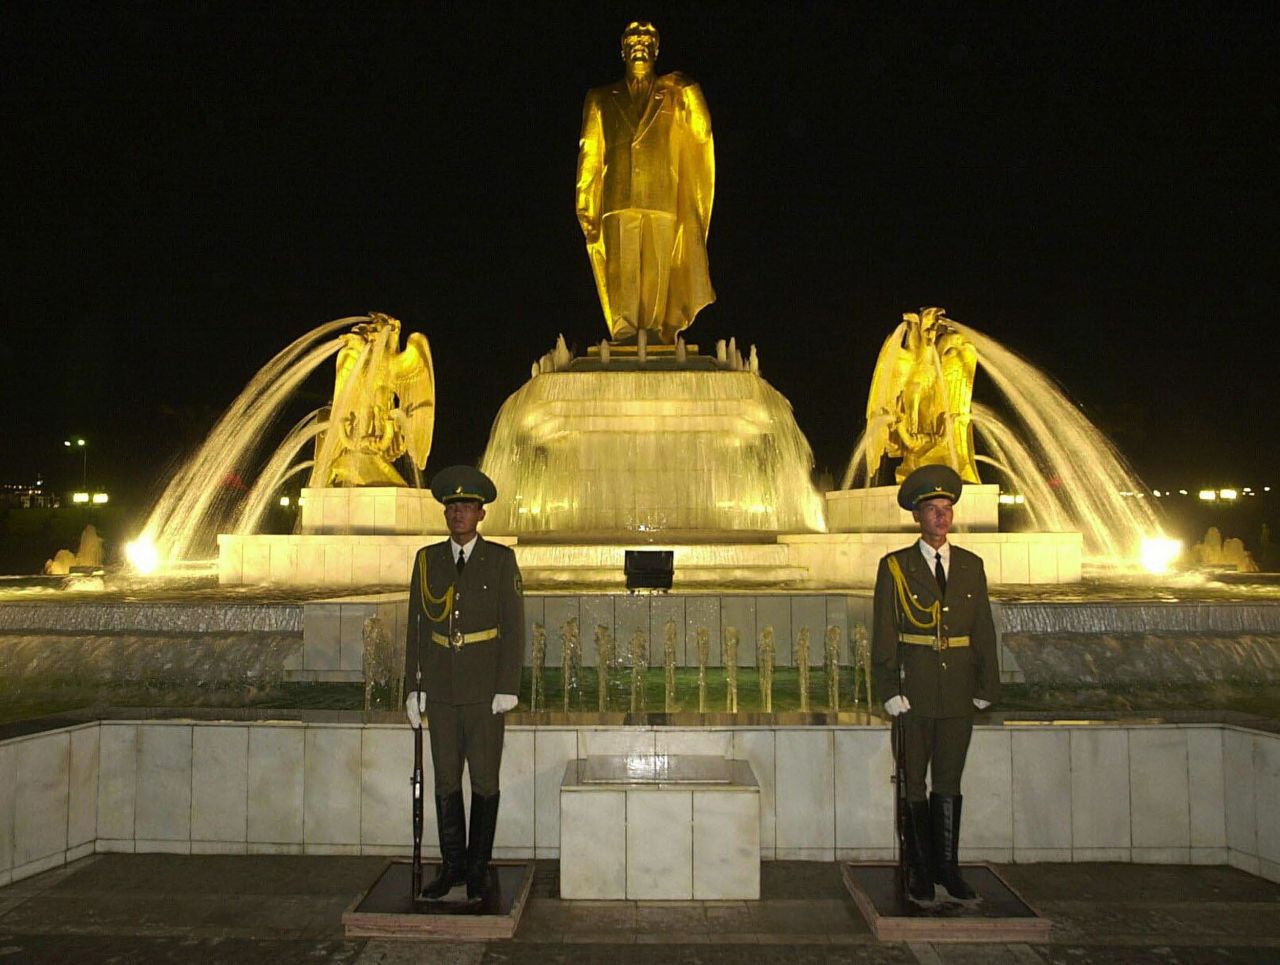 Another statue of Niyazov, with two soldiers standing guard, rises above the country's Independence Monument in Ashgabat. Turkmenistan became independent upon the dissolution of the Soviet Union in 1991.